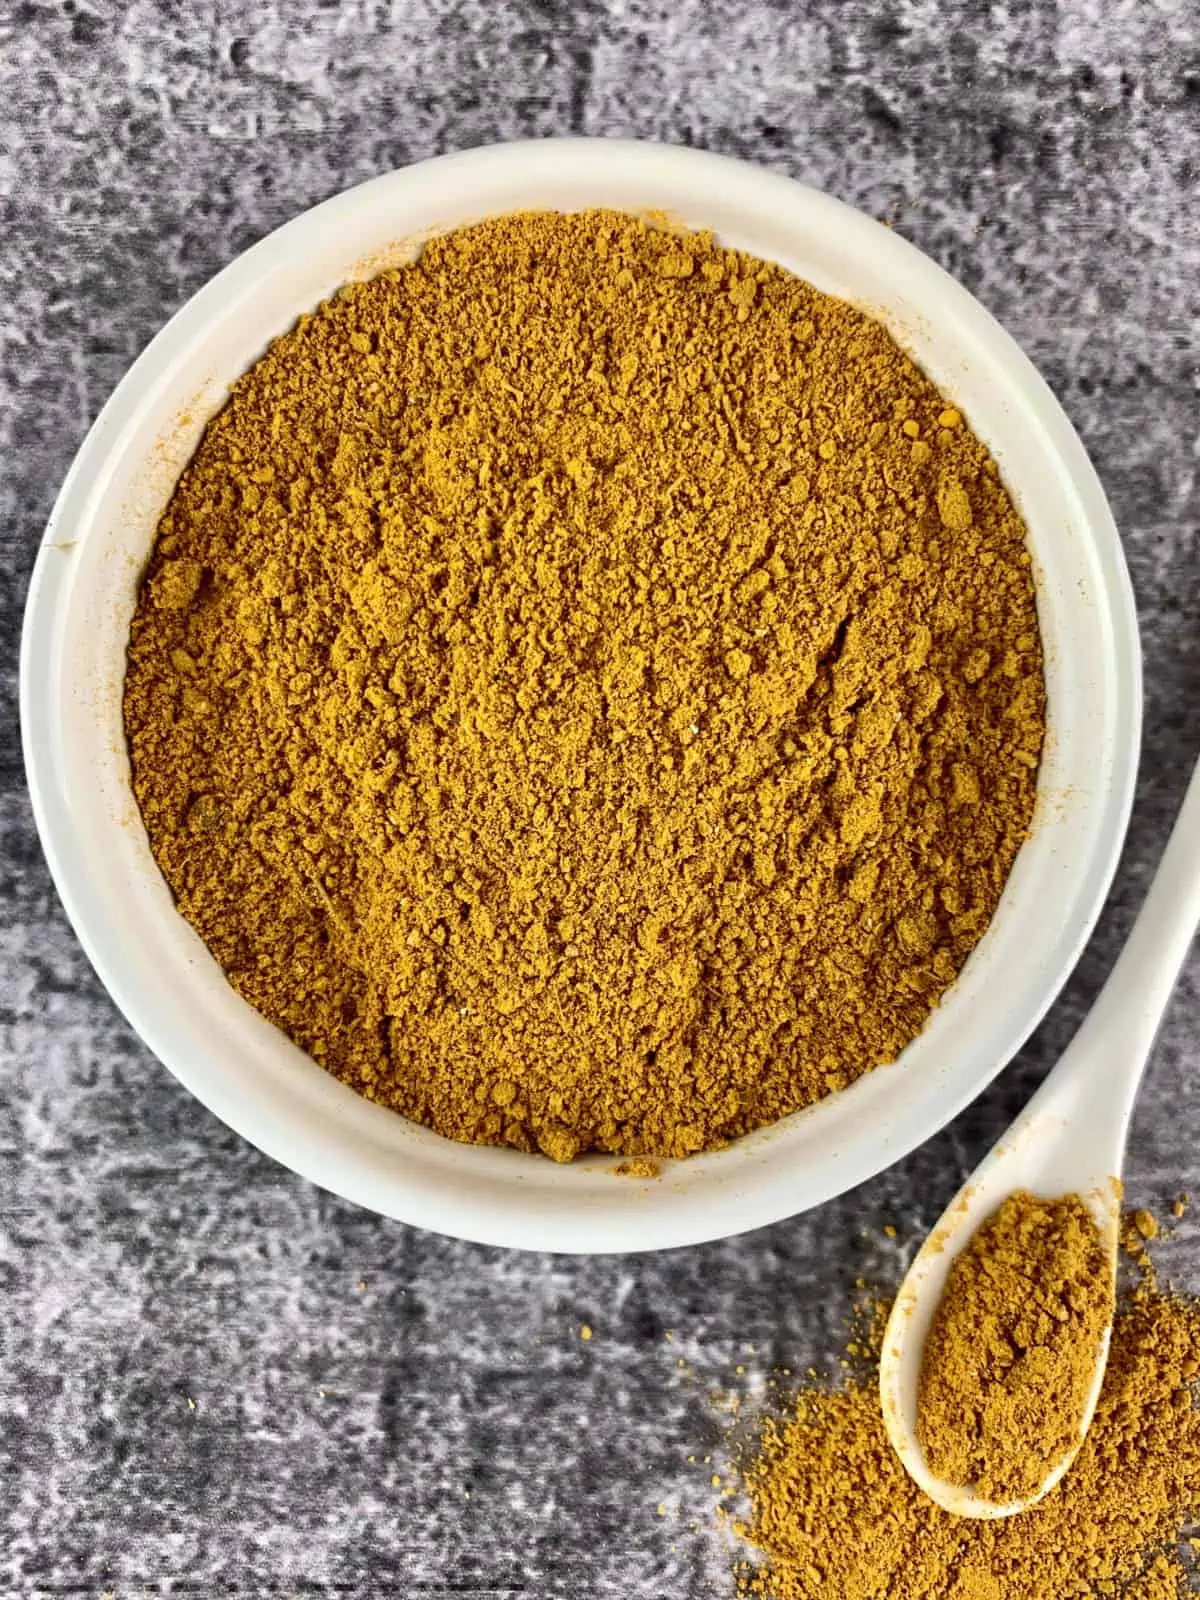 Madras Curry Powder in a white bowl with a teaspoon of powder on the side.